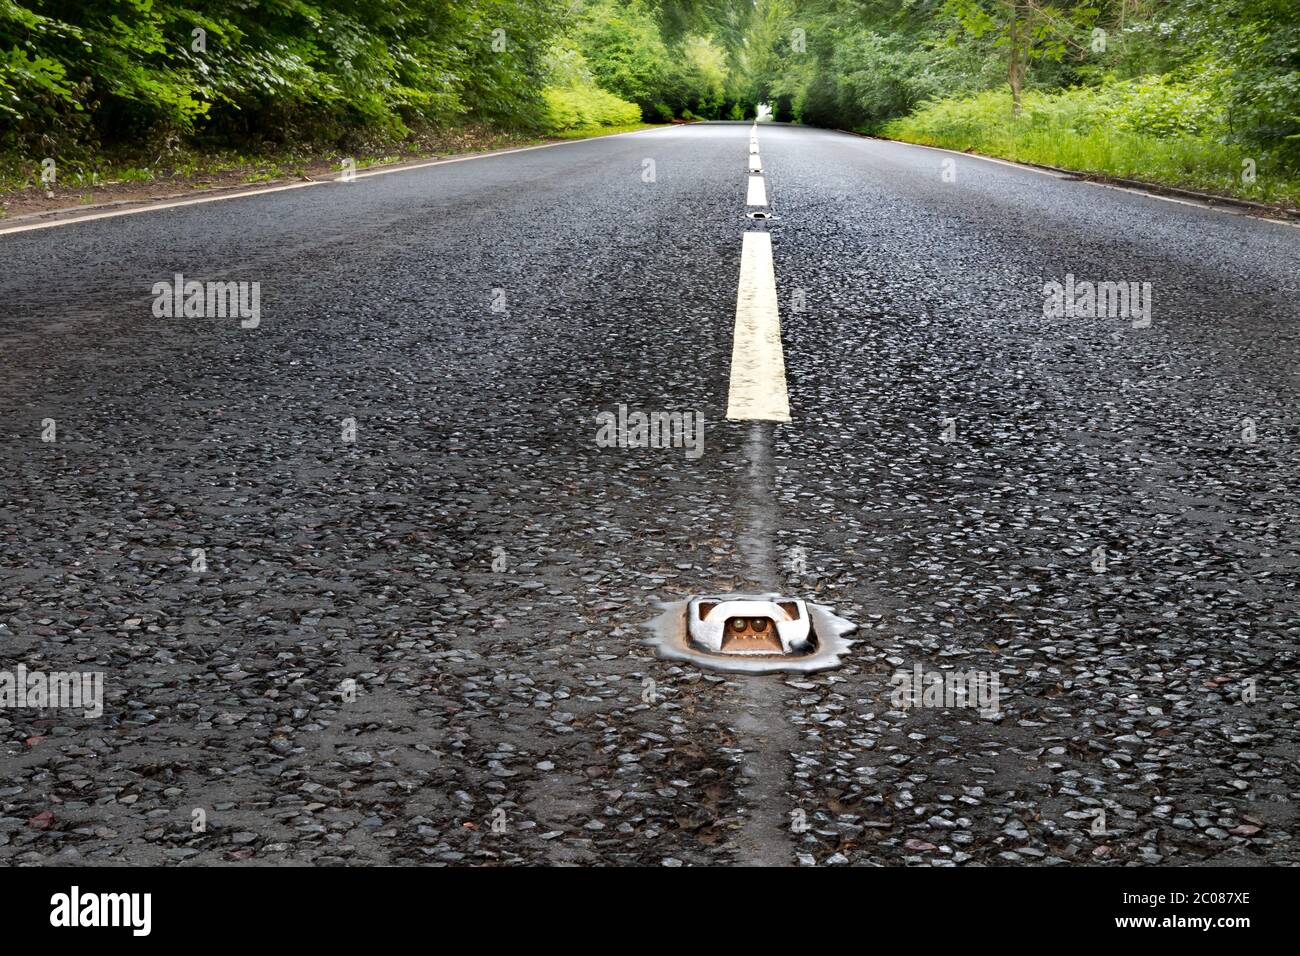 Where does the road go? Stock Photo